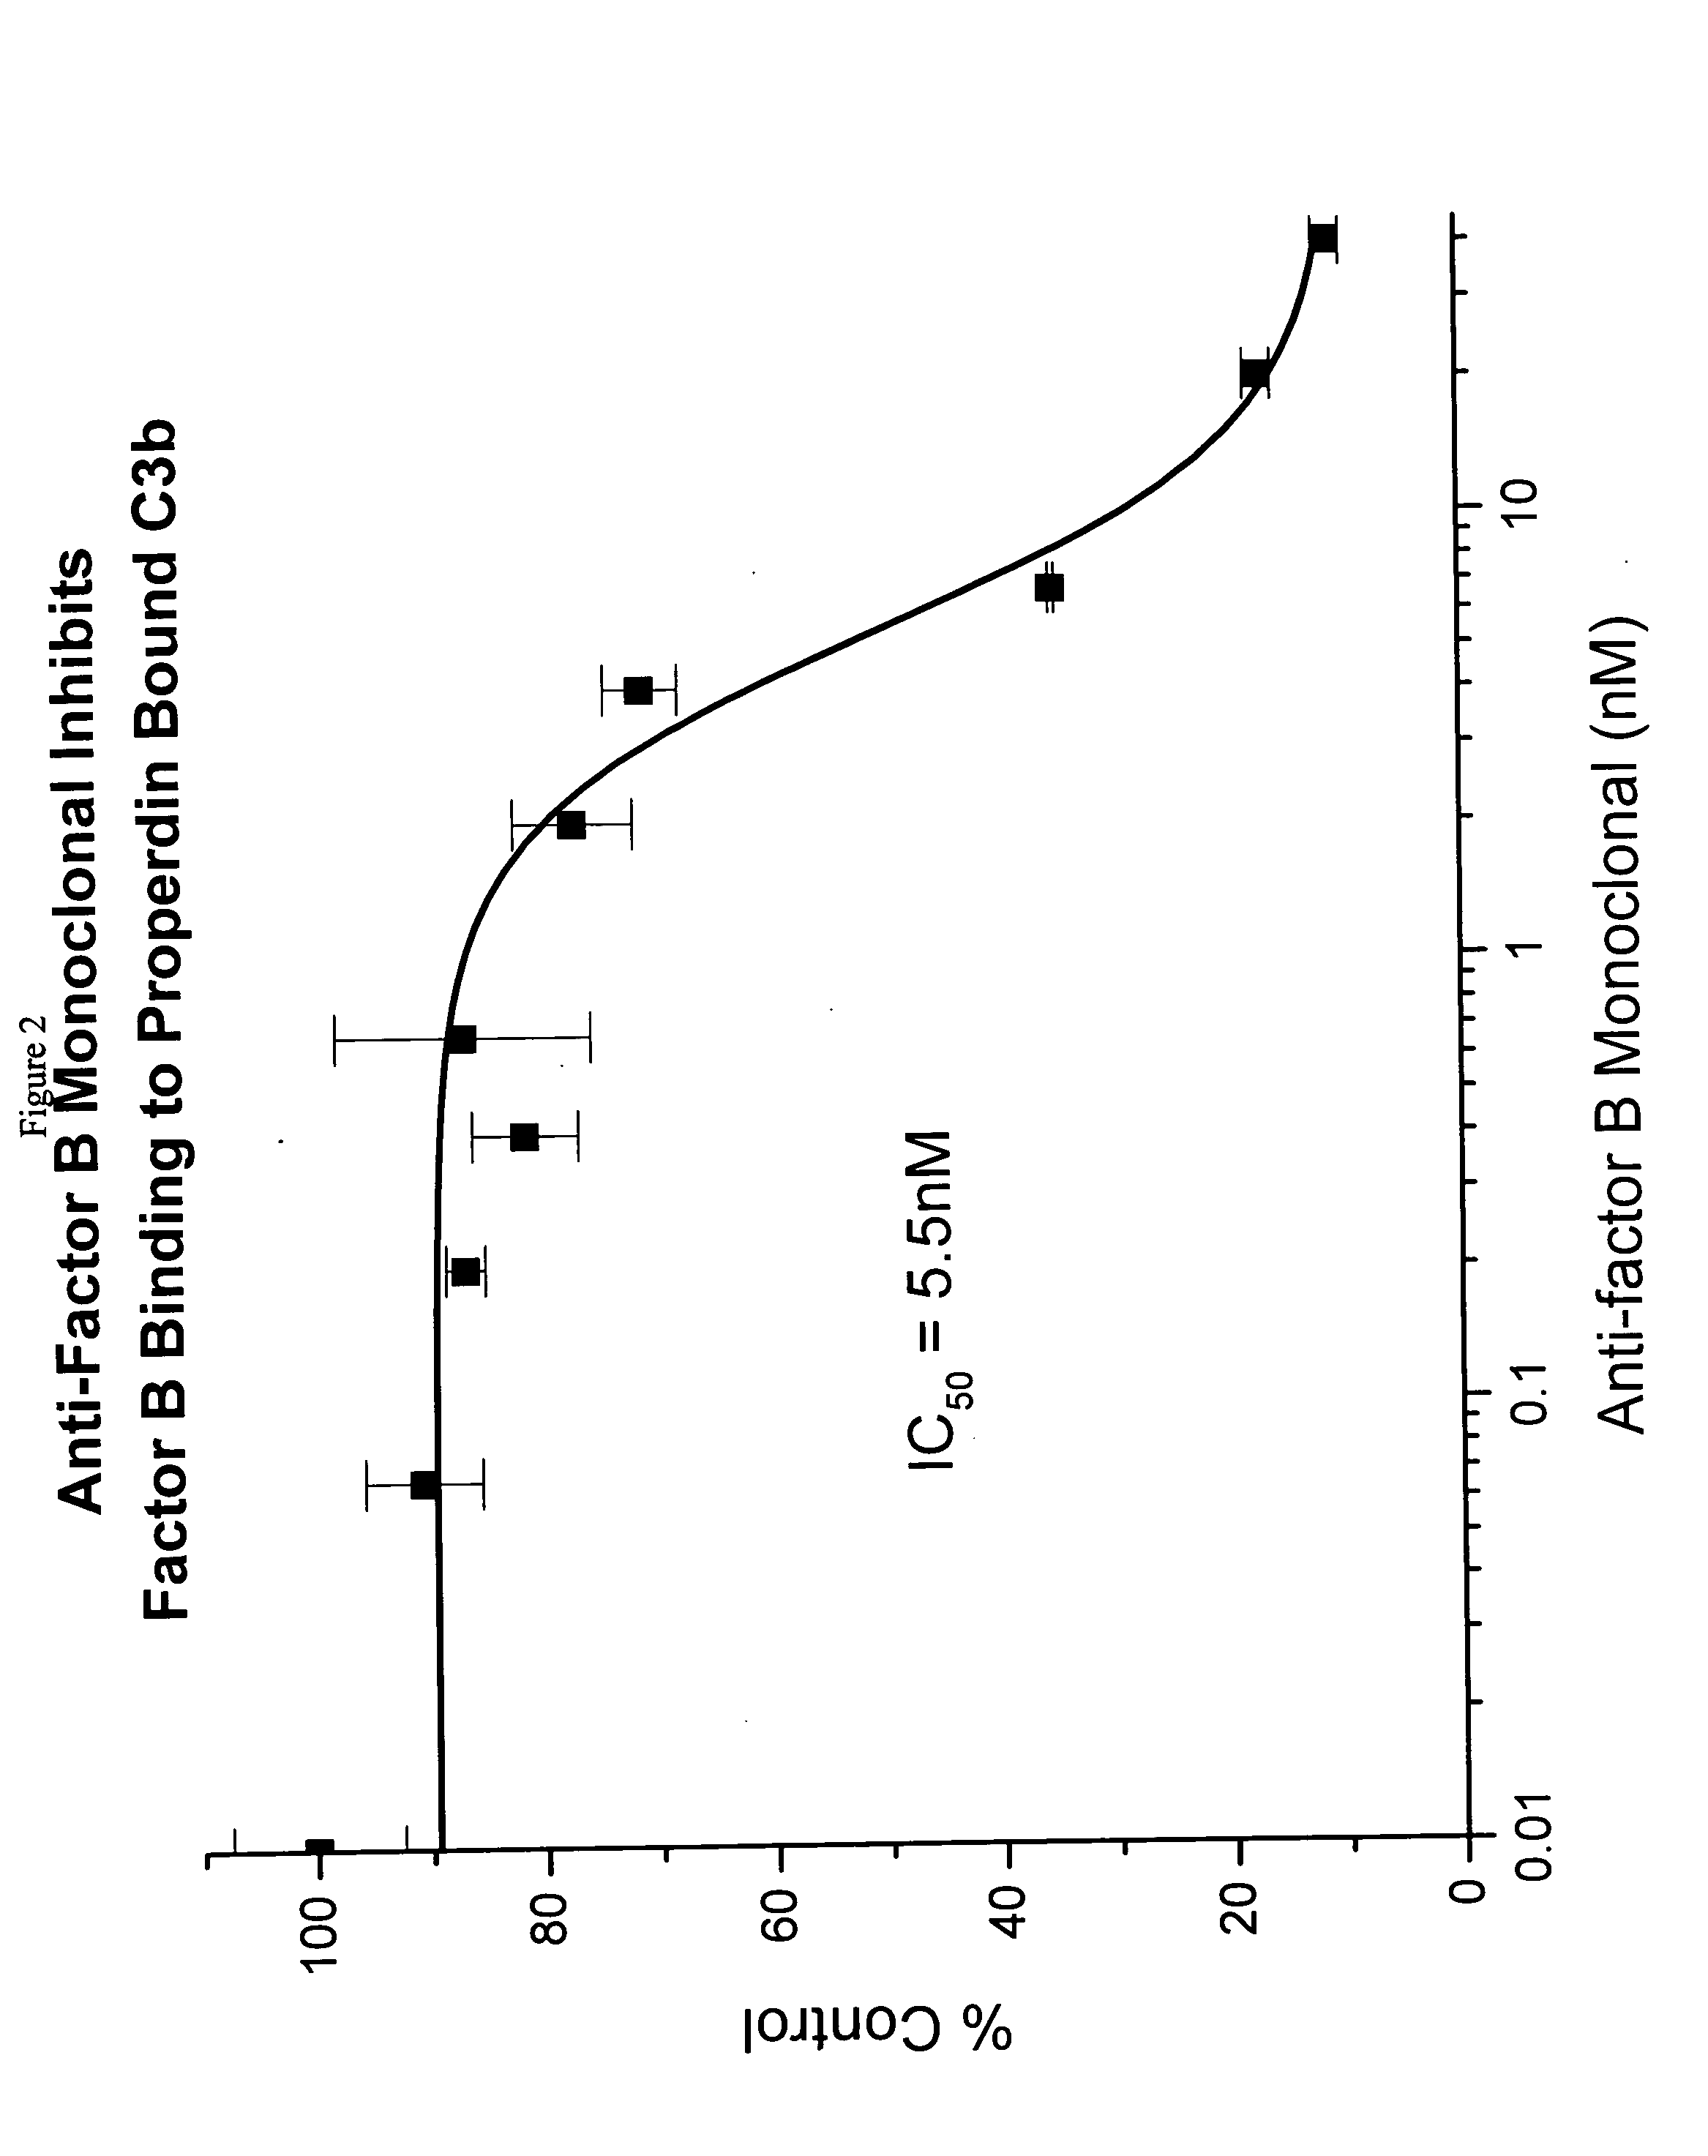 Method of inhibiting factor B-mediated complement activation, and the uses thereof